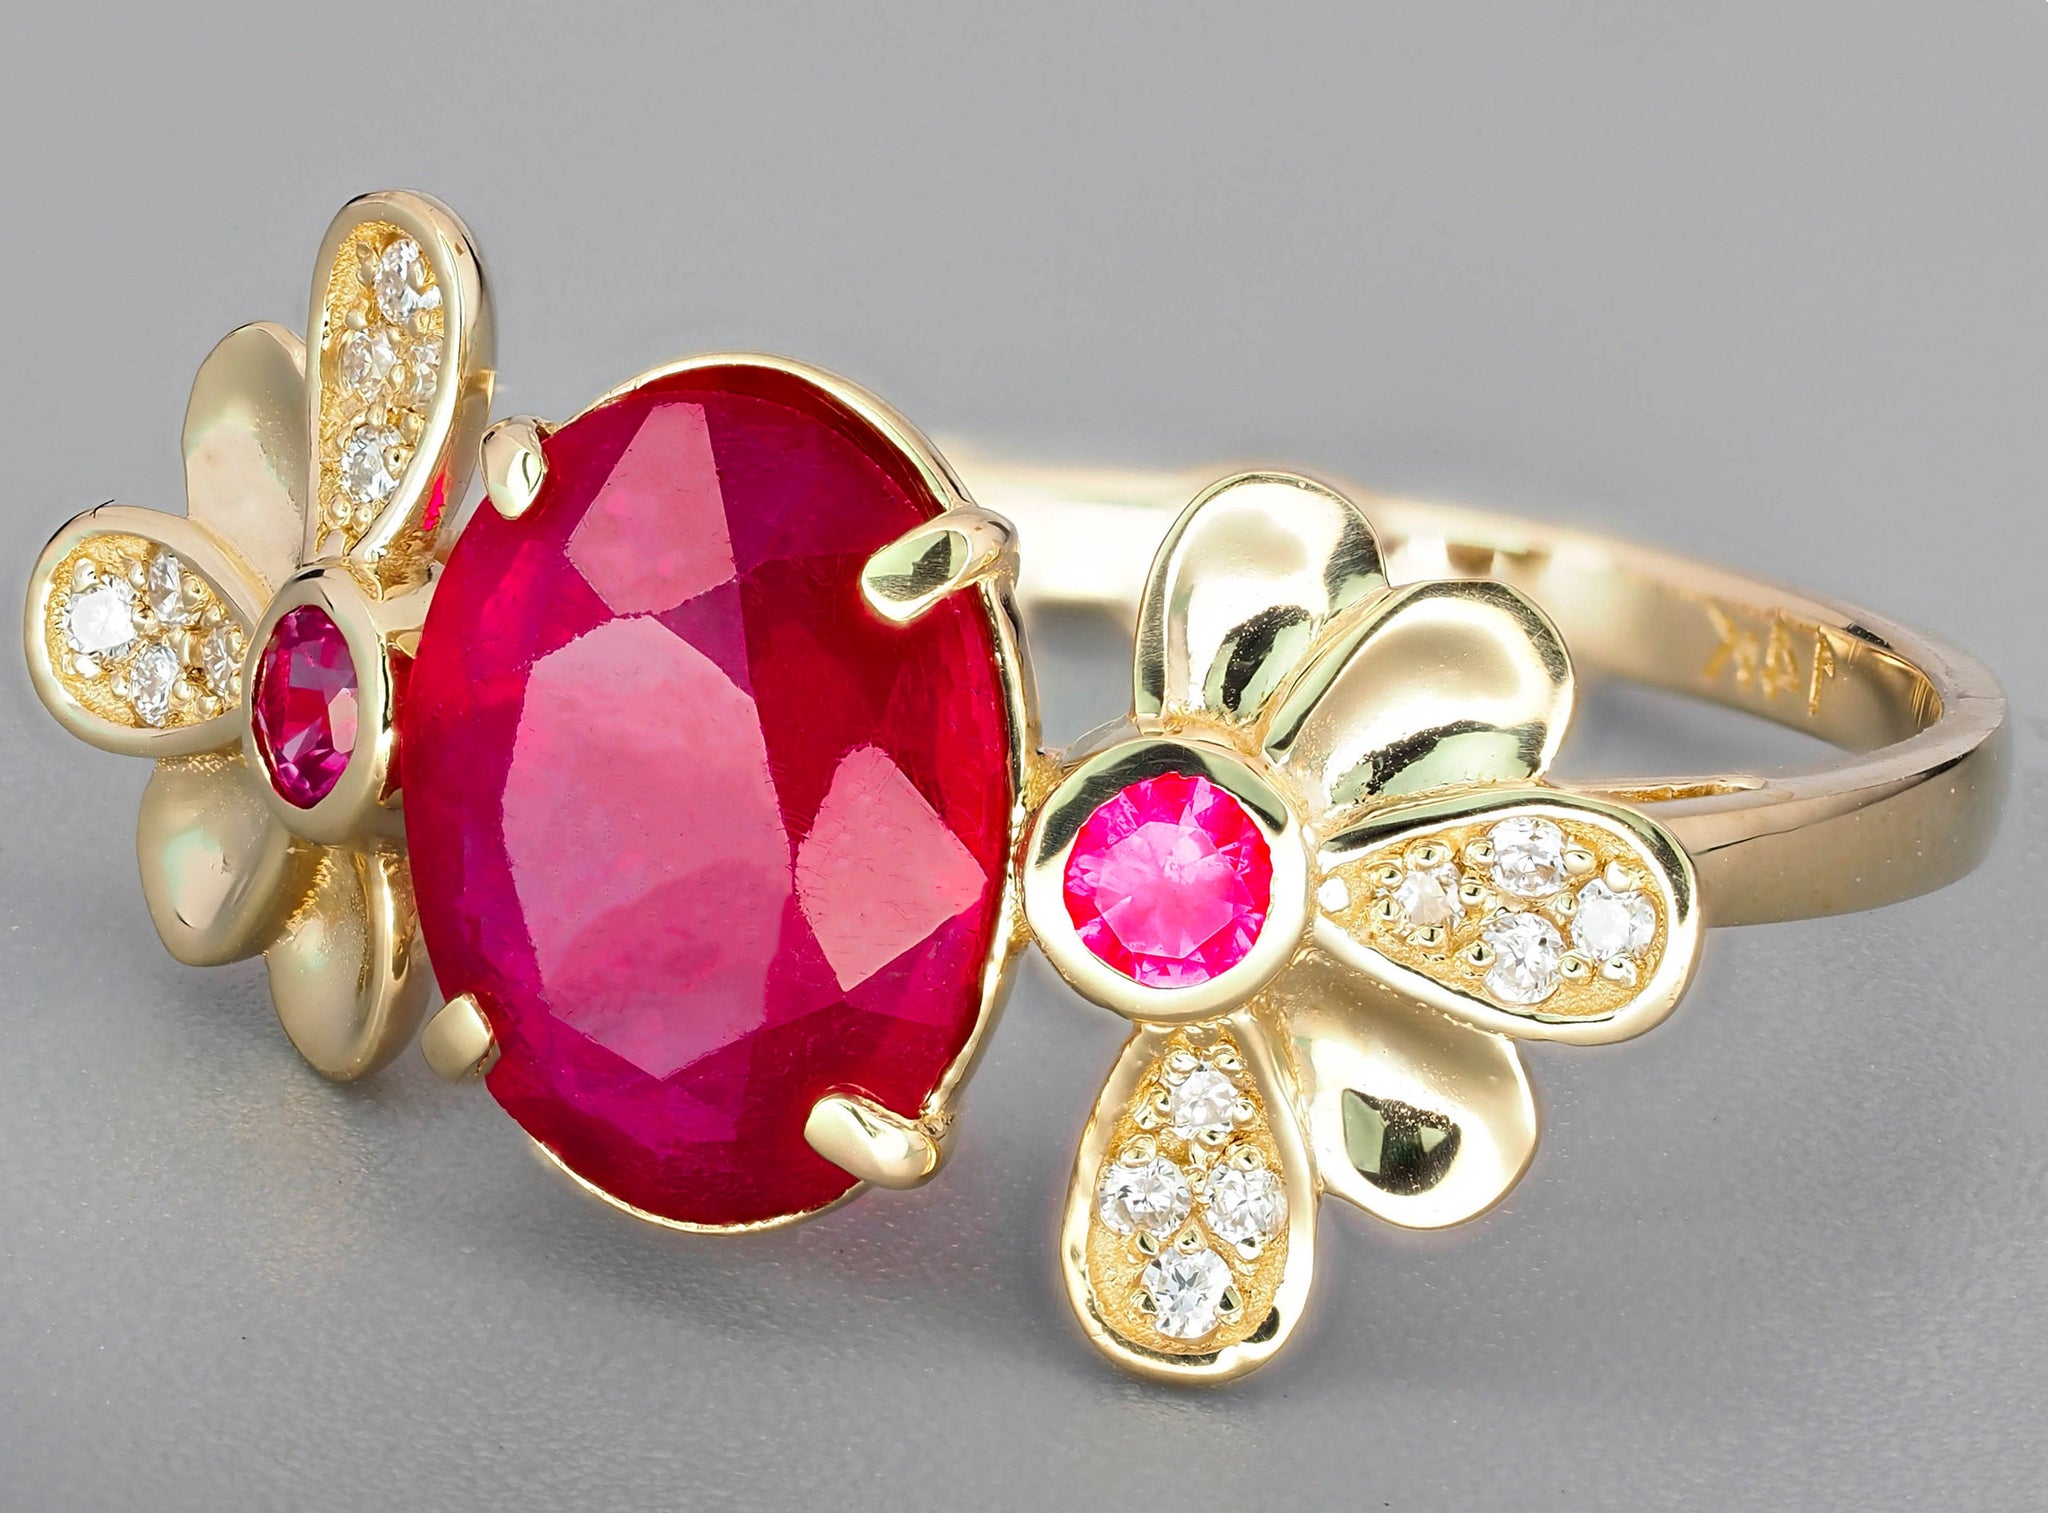 Valentines Day Gifts Vintage Rings for Women Ruby Ring Best Gifts Couples  Valentine's Day - Walmart.com